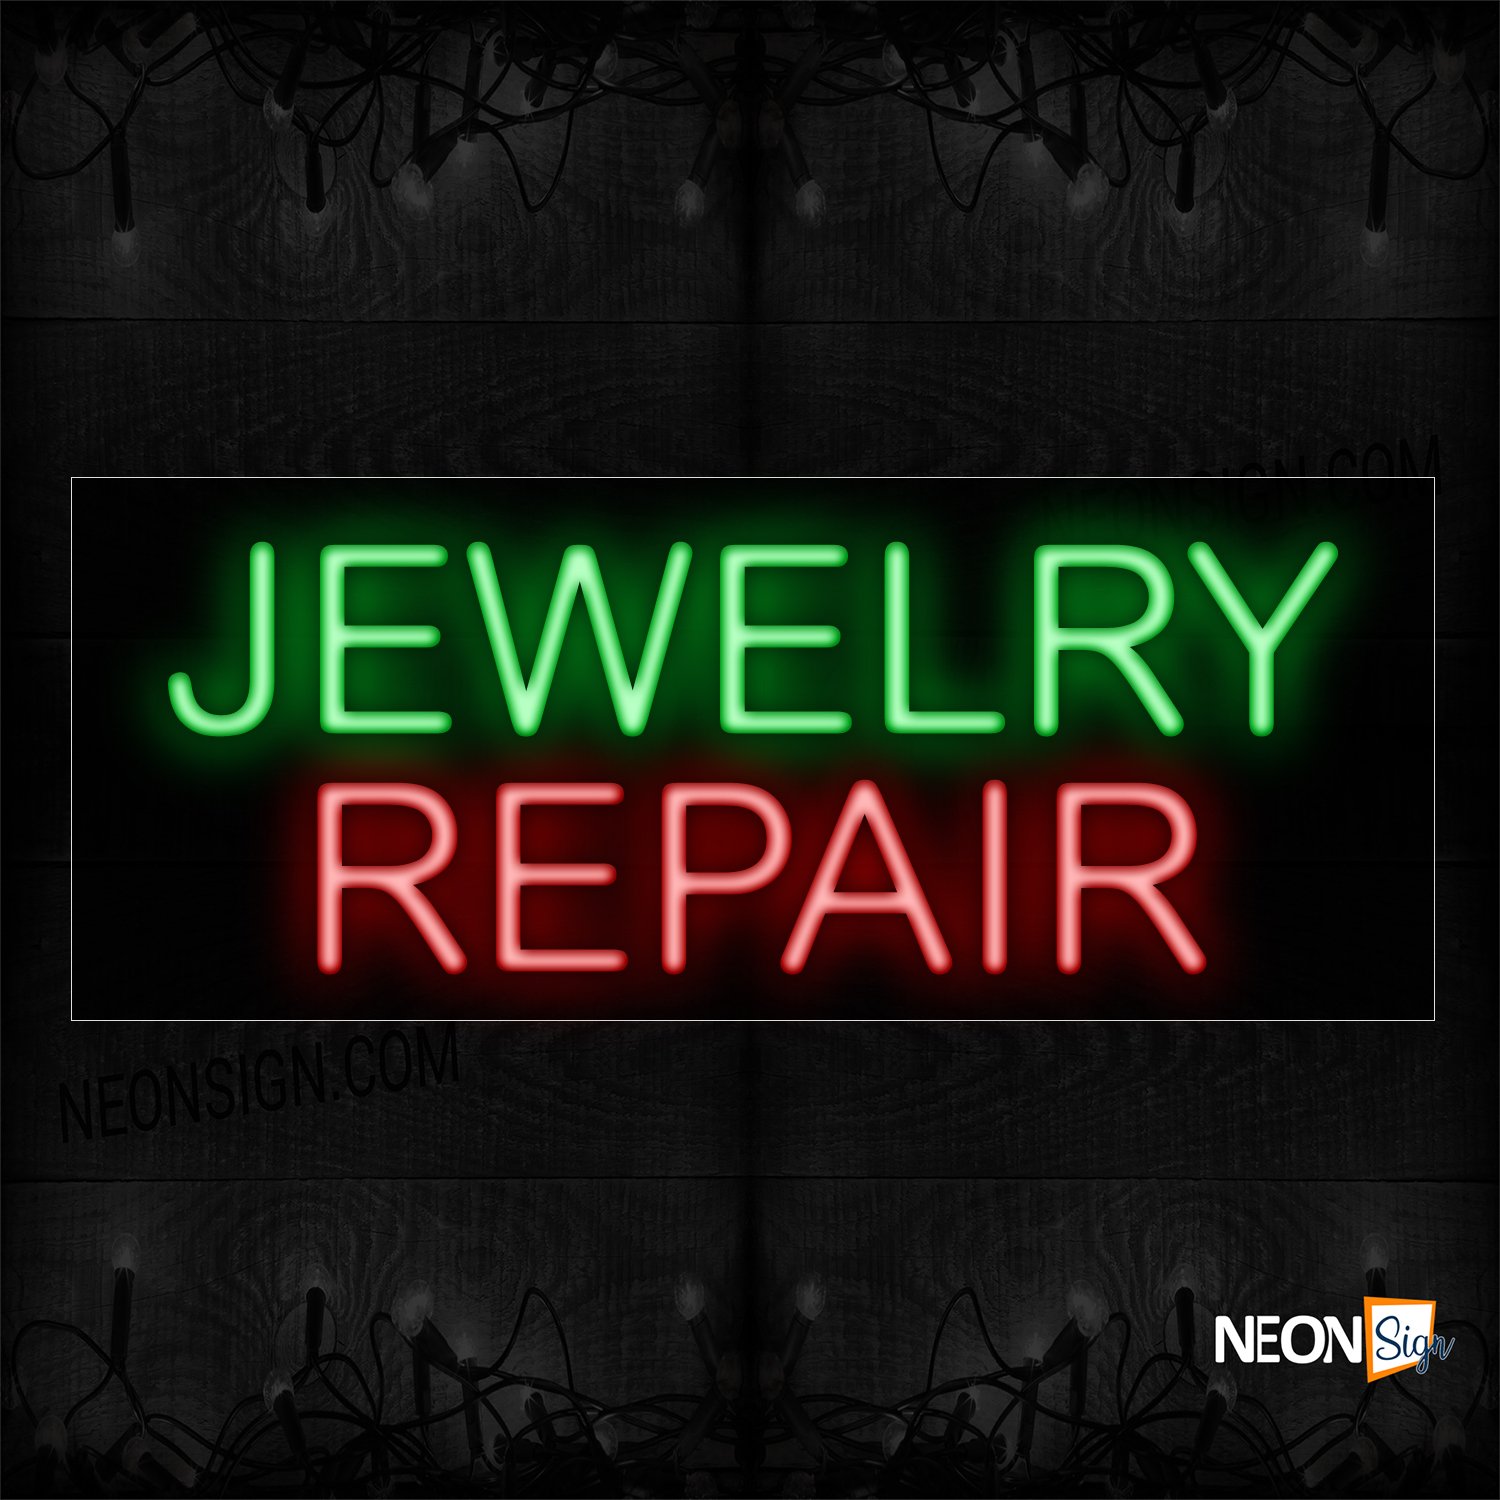 Image of 12085 Jewelry Repair With Neon Sign_10x24 Black Backing